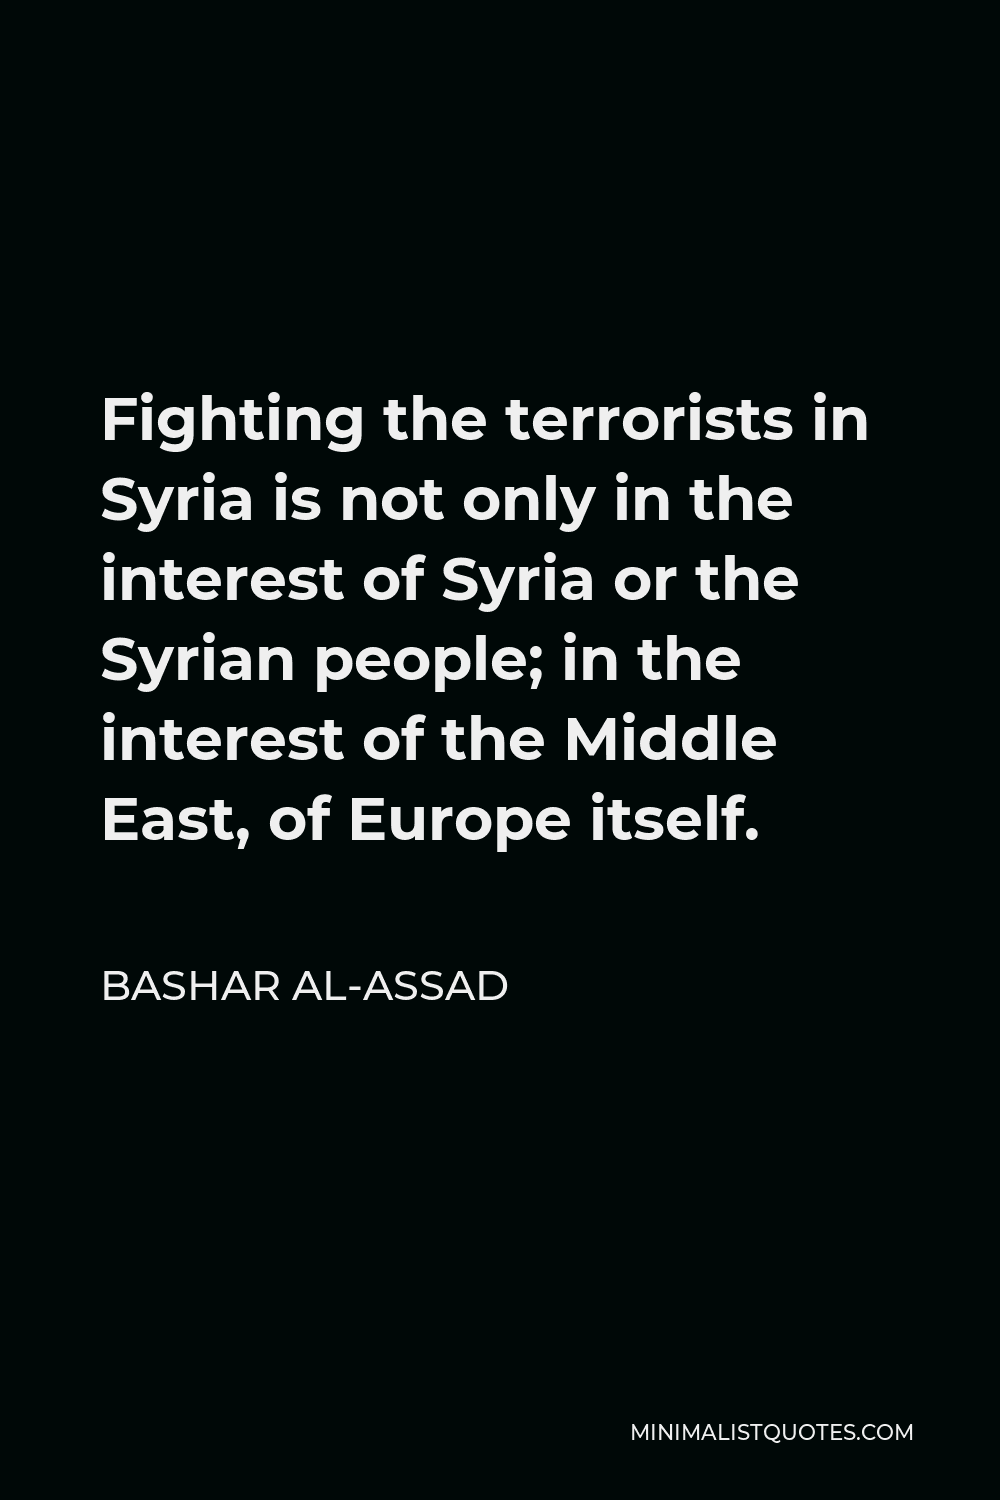 Bashar al-Assad Quote - Fighting the terrorists in Syria is not only in the interest of Syria or the Syrian people; in the interest of the Middle East, of Europe itself.